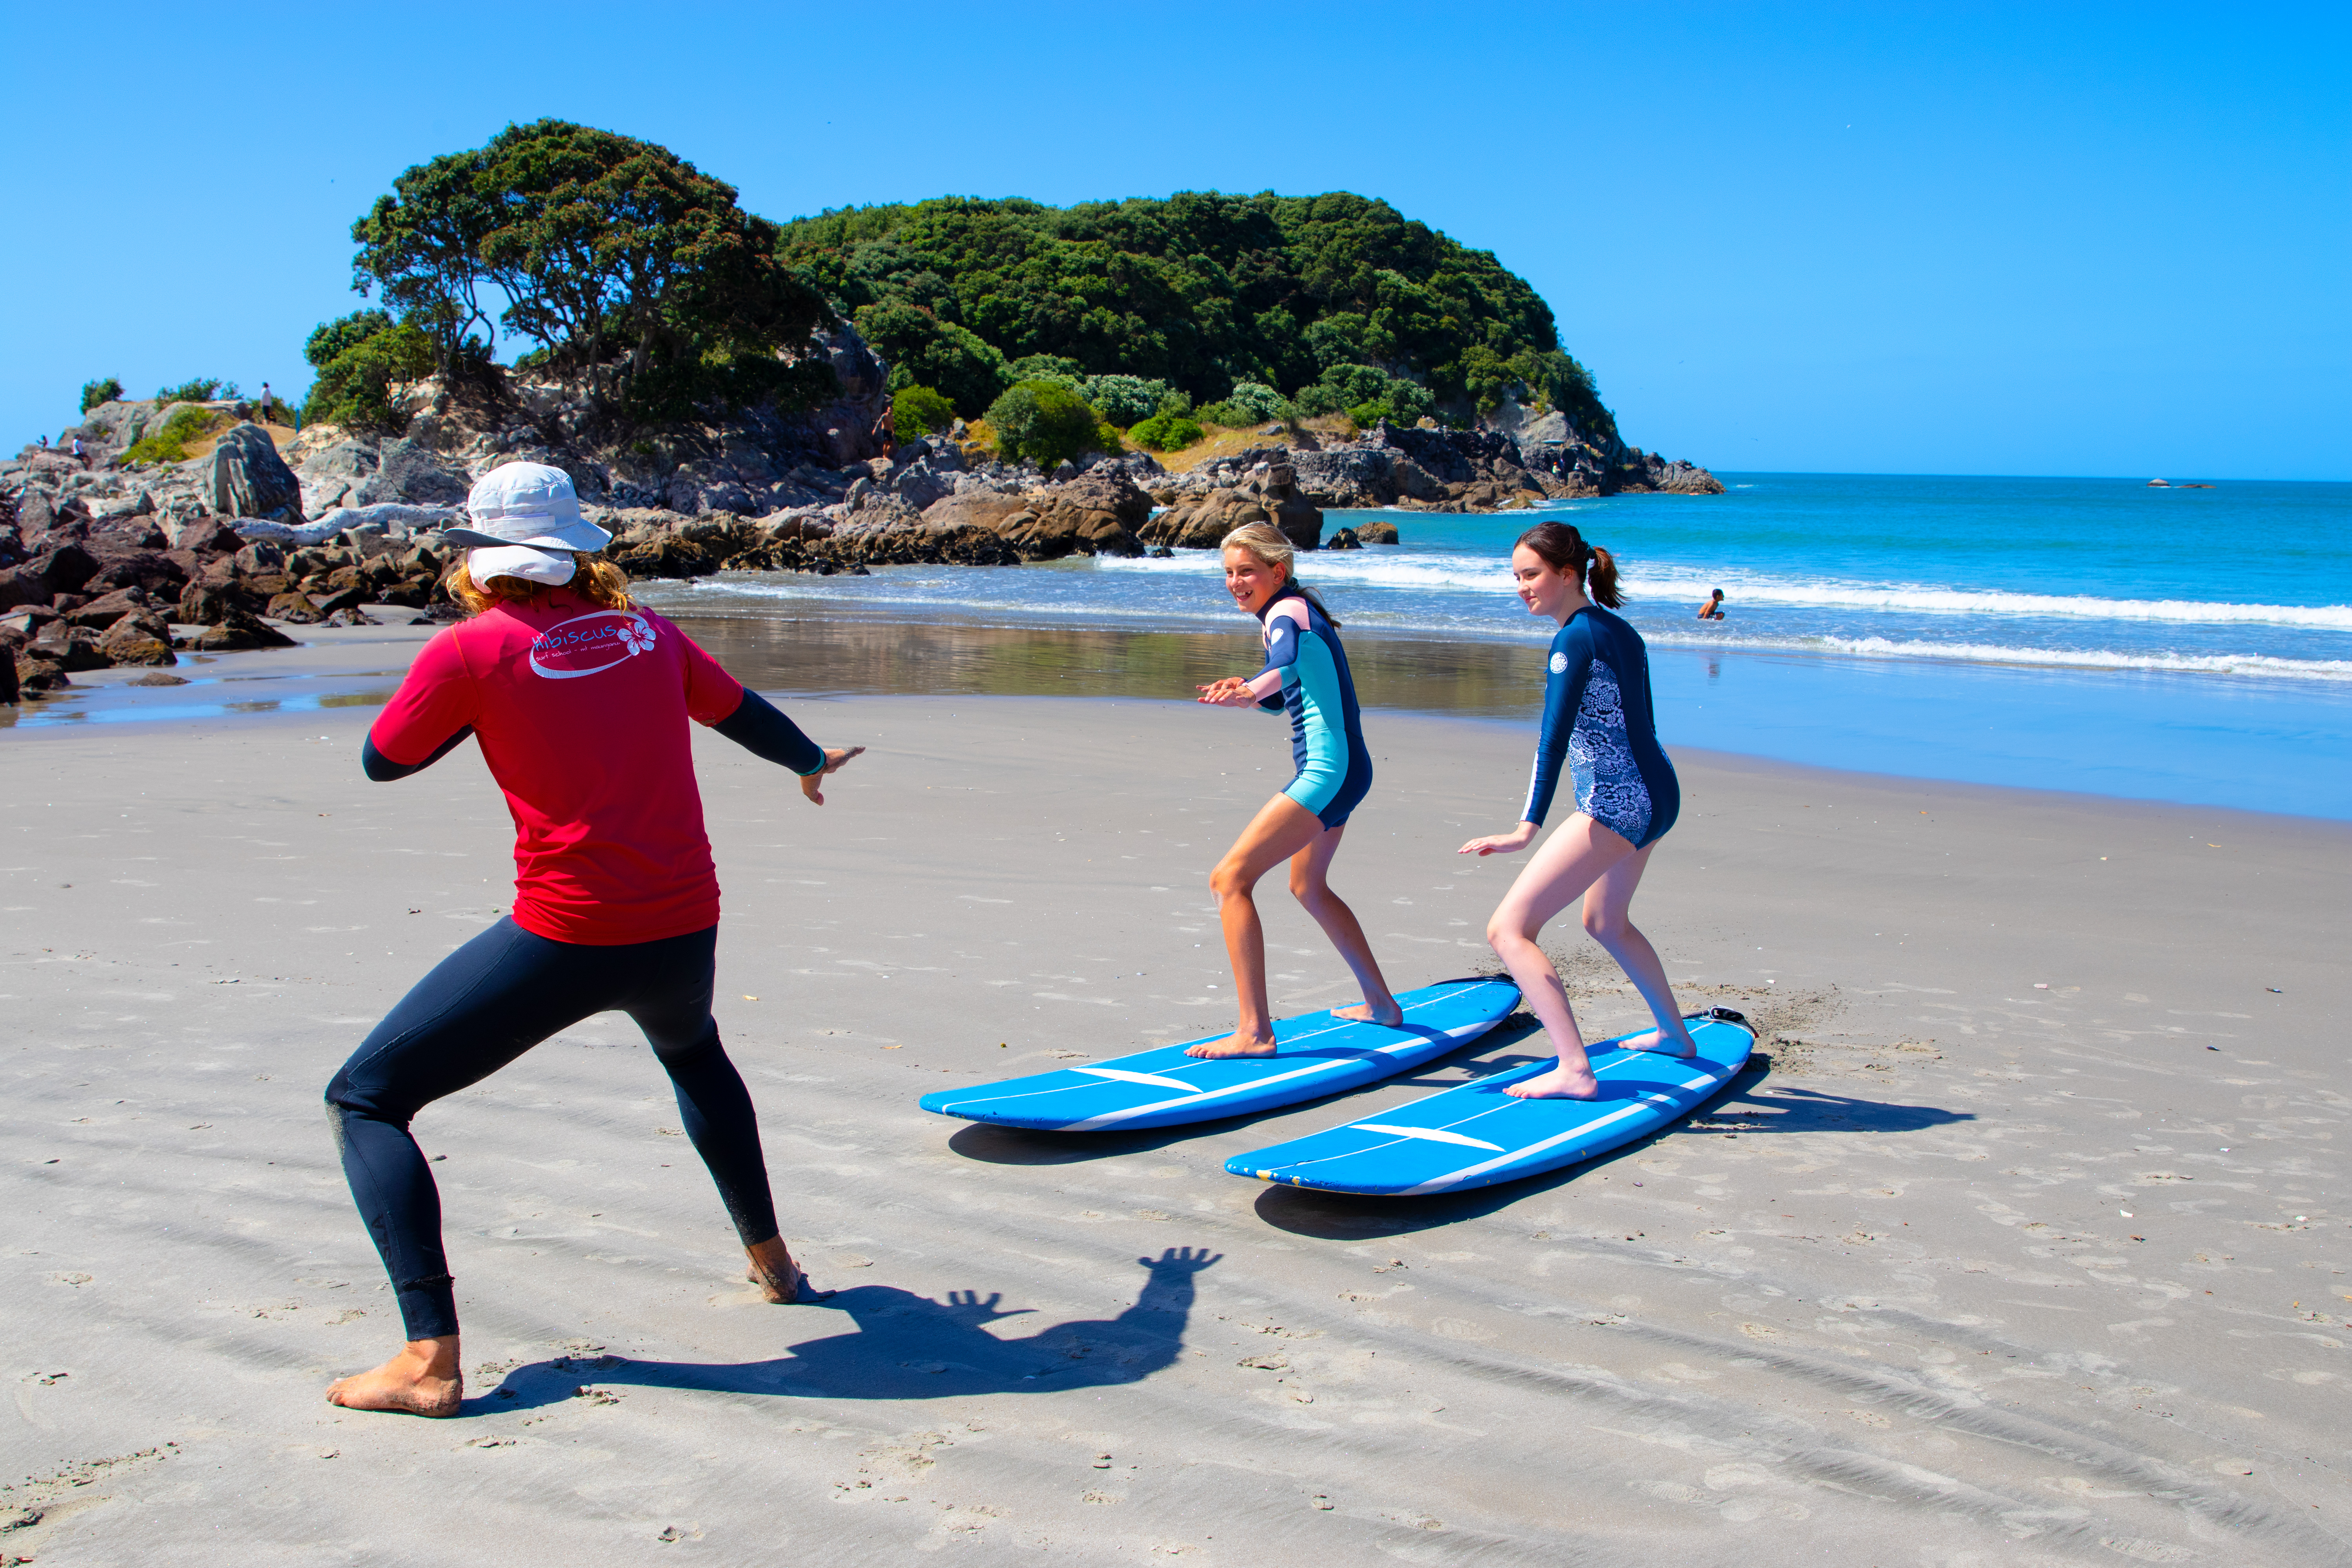 Surf school helps kids learn how to surf on shore first. PC: Surf2Surf